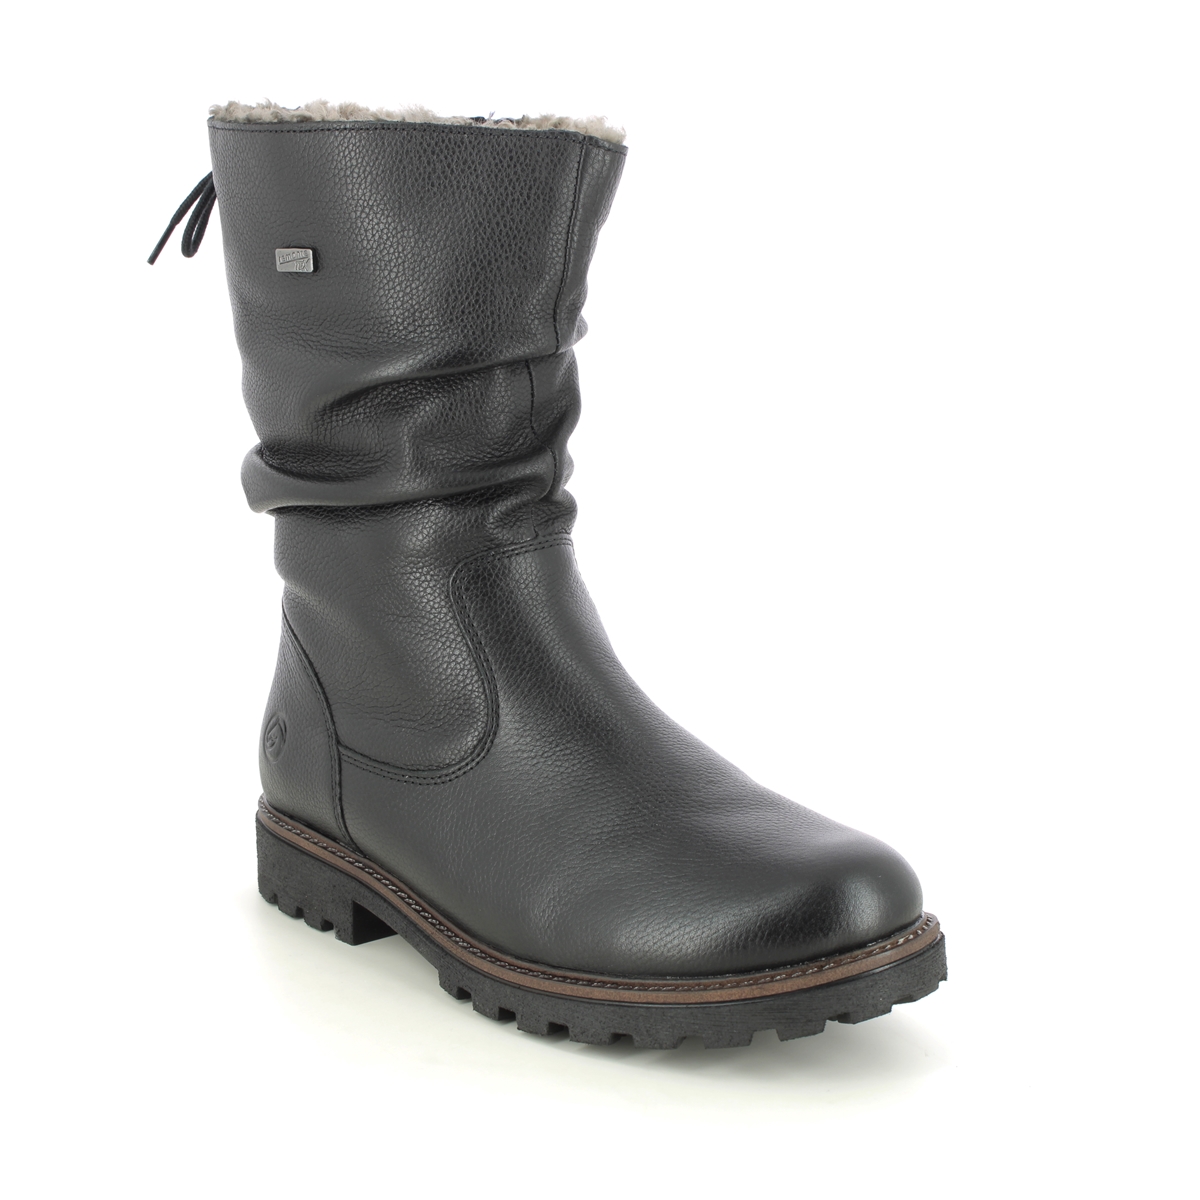 Remonte Brand Tex Sheep Black Leather Womens Mid Calf Boots D8477-01 In Size 40 In Plain Black Leather